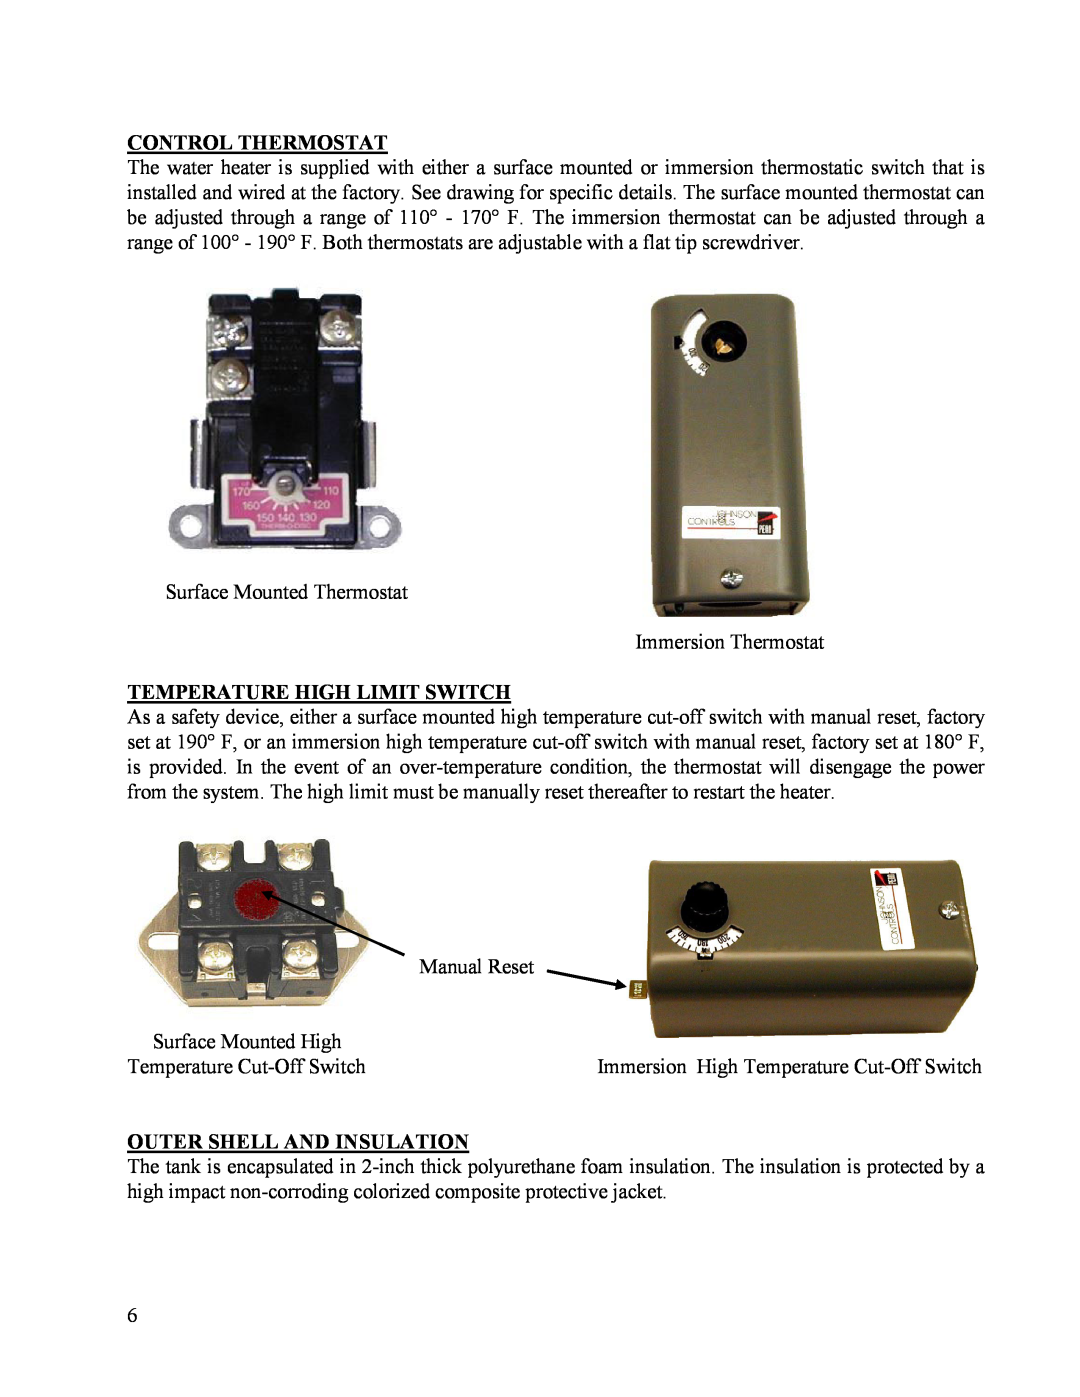 Hubbell Electric Heater Company ME manual Control Thermostat, Temperature High Limit Switch, Outer Shell And Insulation 